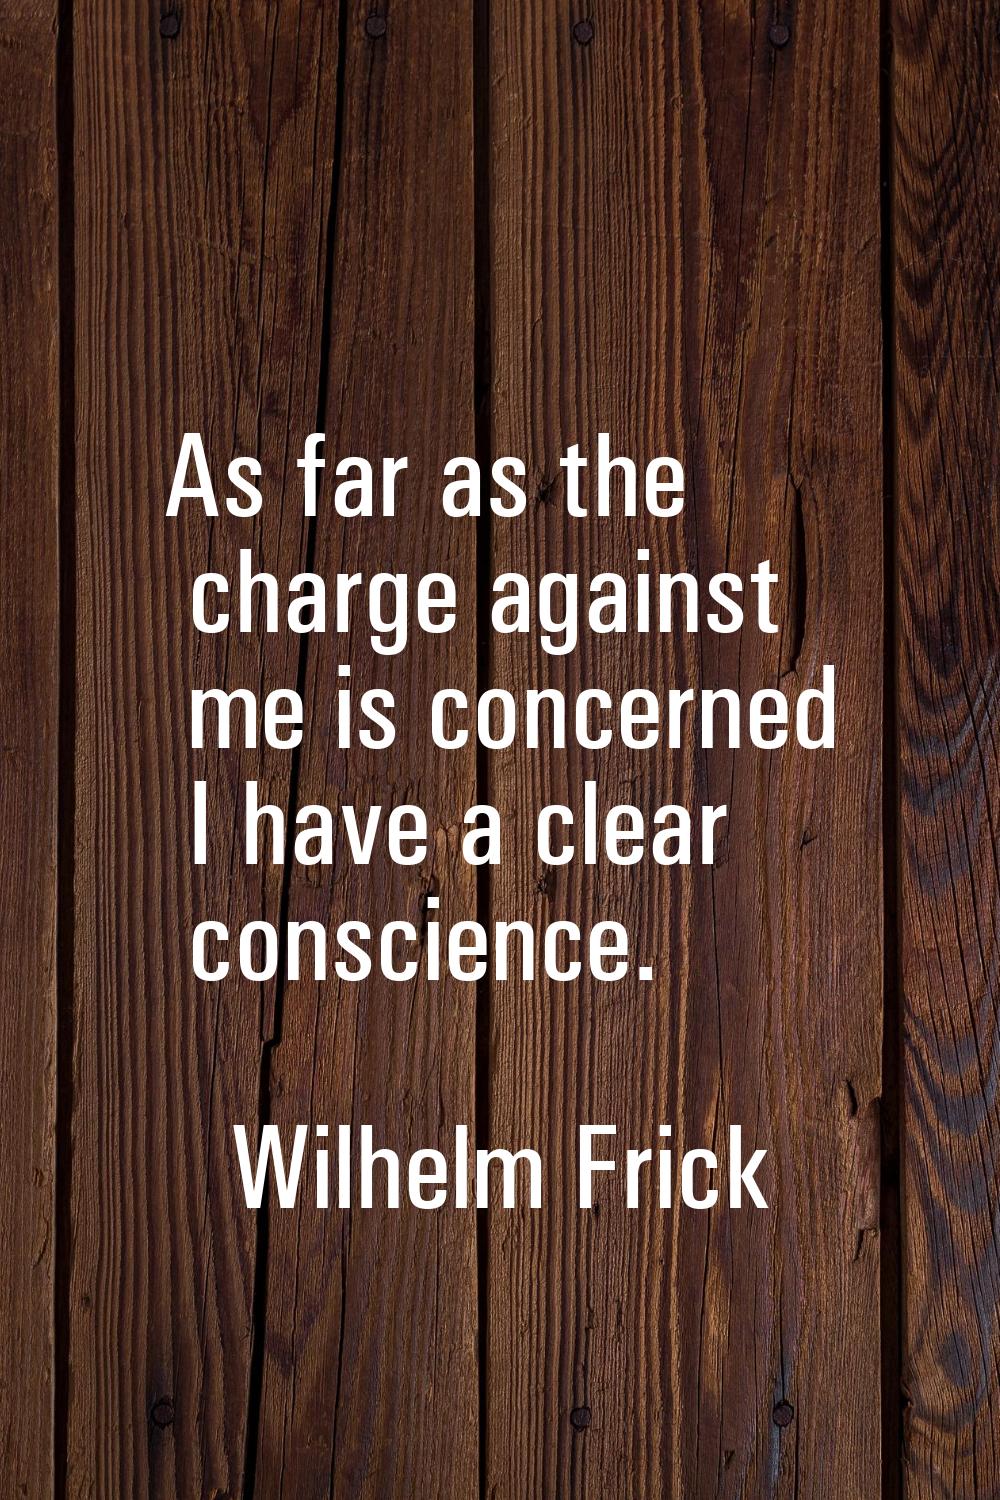 As far as the charge against me is concerned I have a clear conscience.